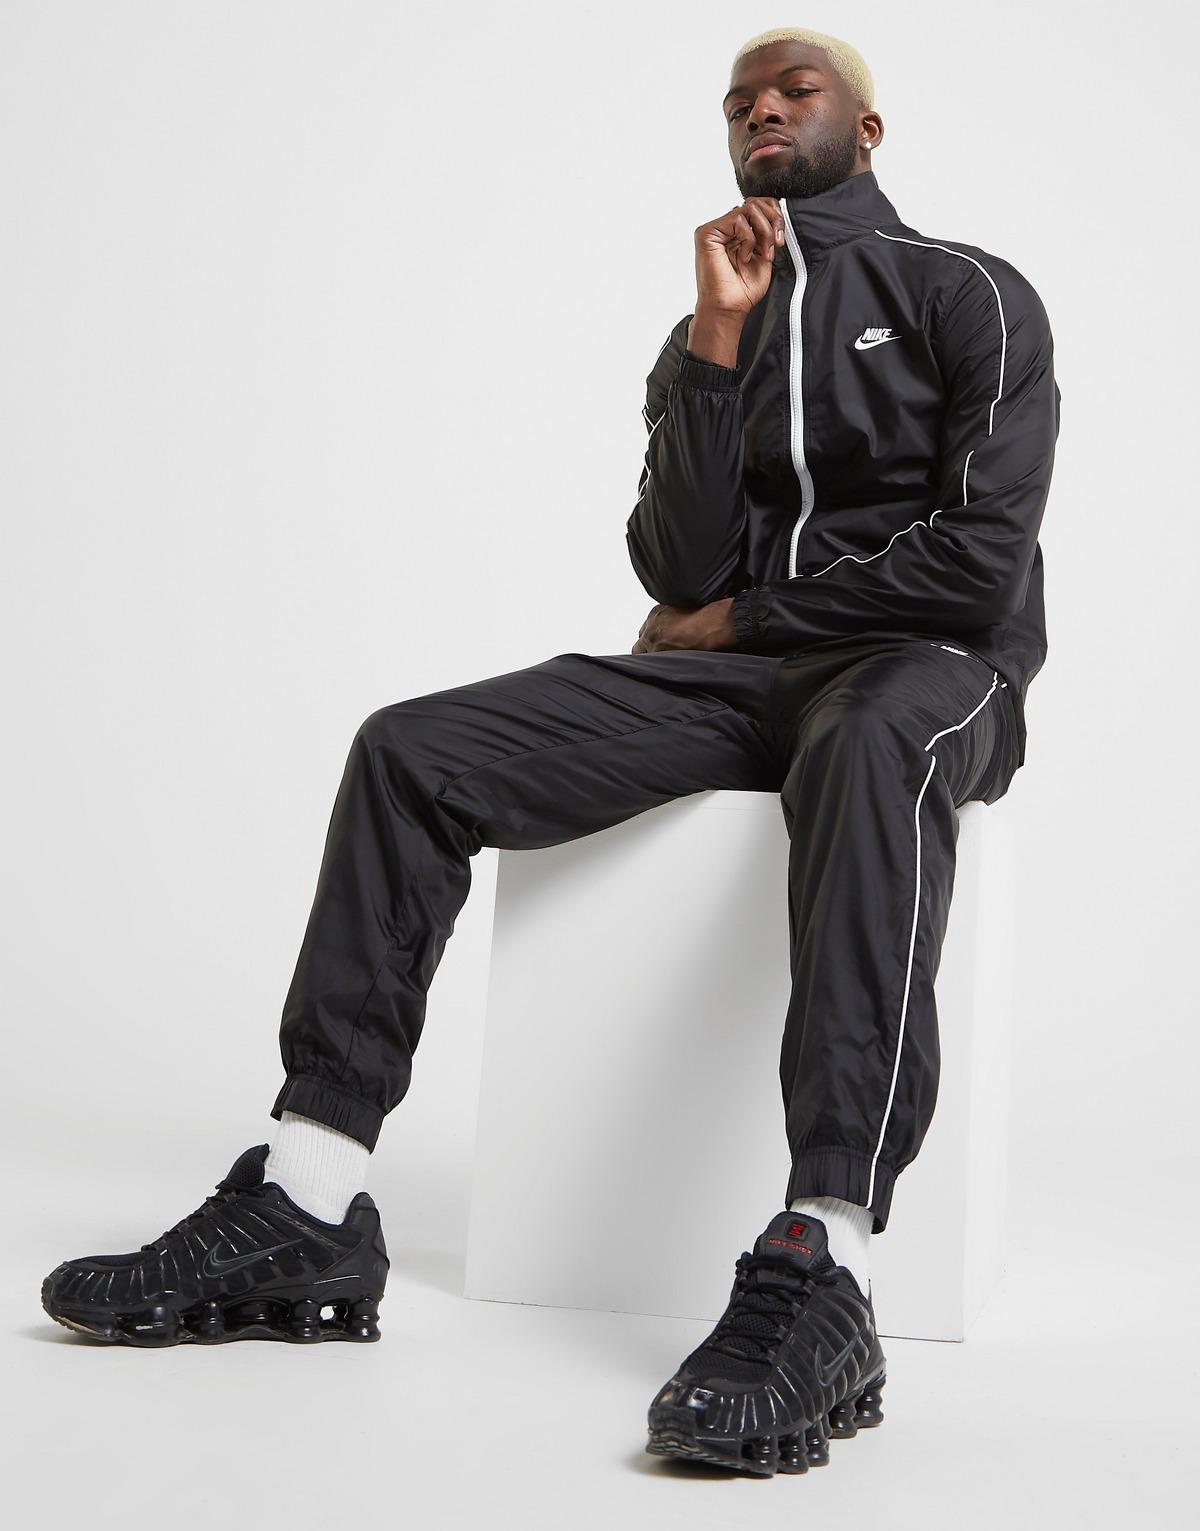 Nike Synthetic Tracksuit in Black/White (Black) for Men - Save 17% - Lyst